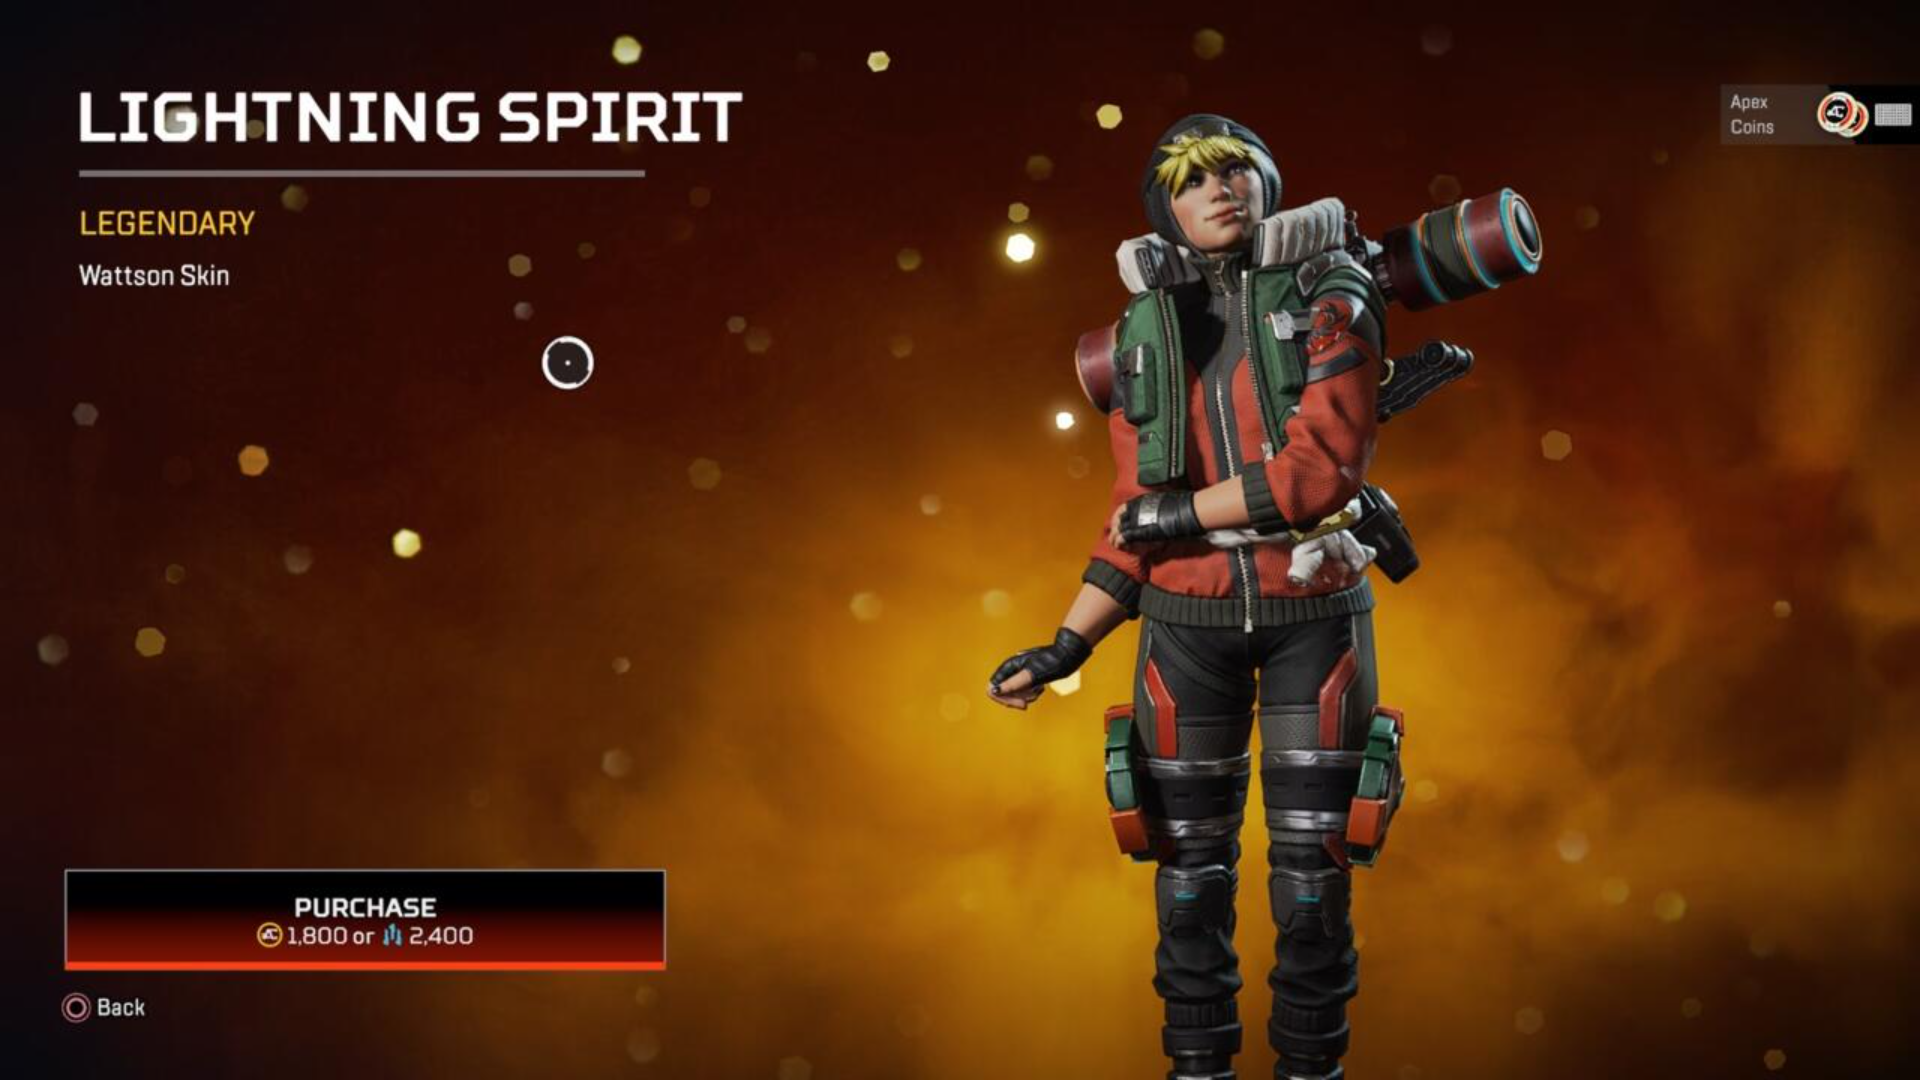 Apex Legends Gaiden Event Skins Reference Which Anime Are They Based On